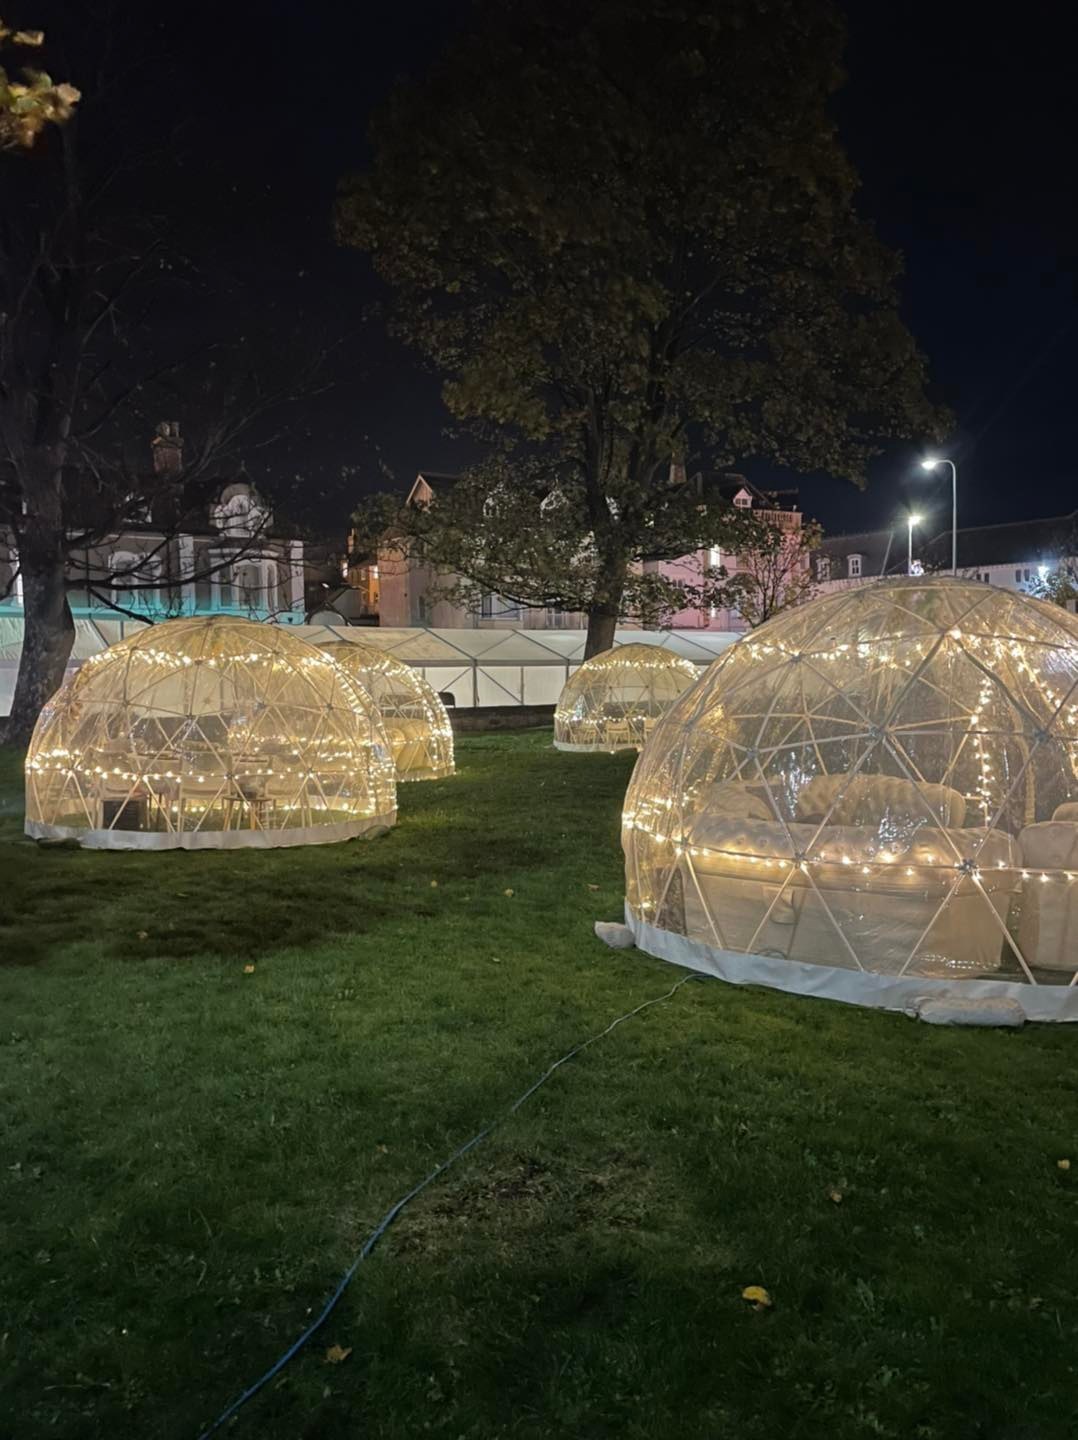 Guests could hire an igloo. Picture: Llandudno Christmas Extravaganza?